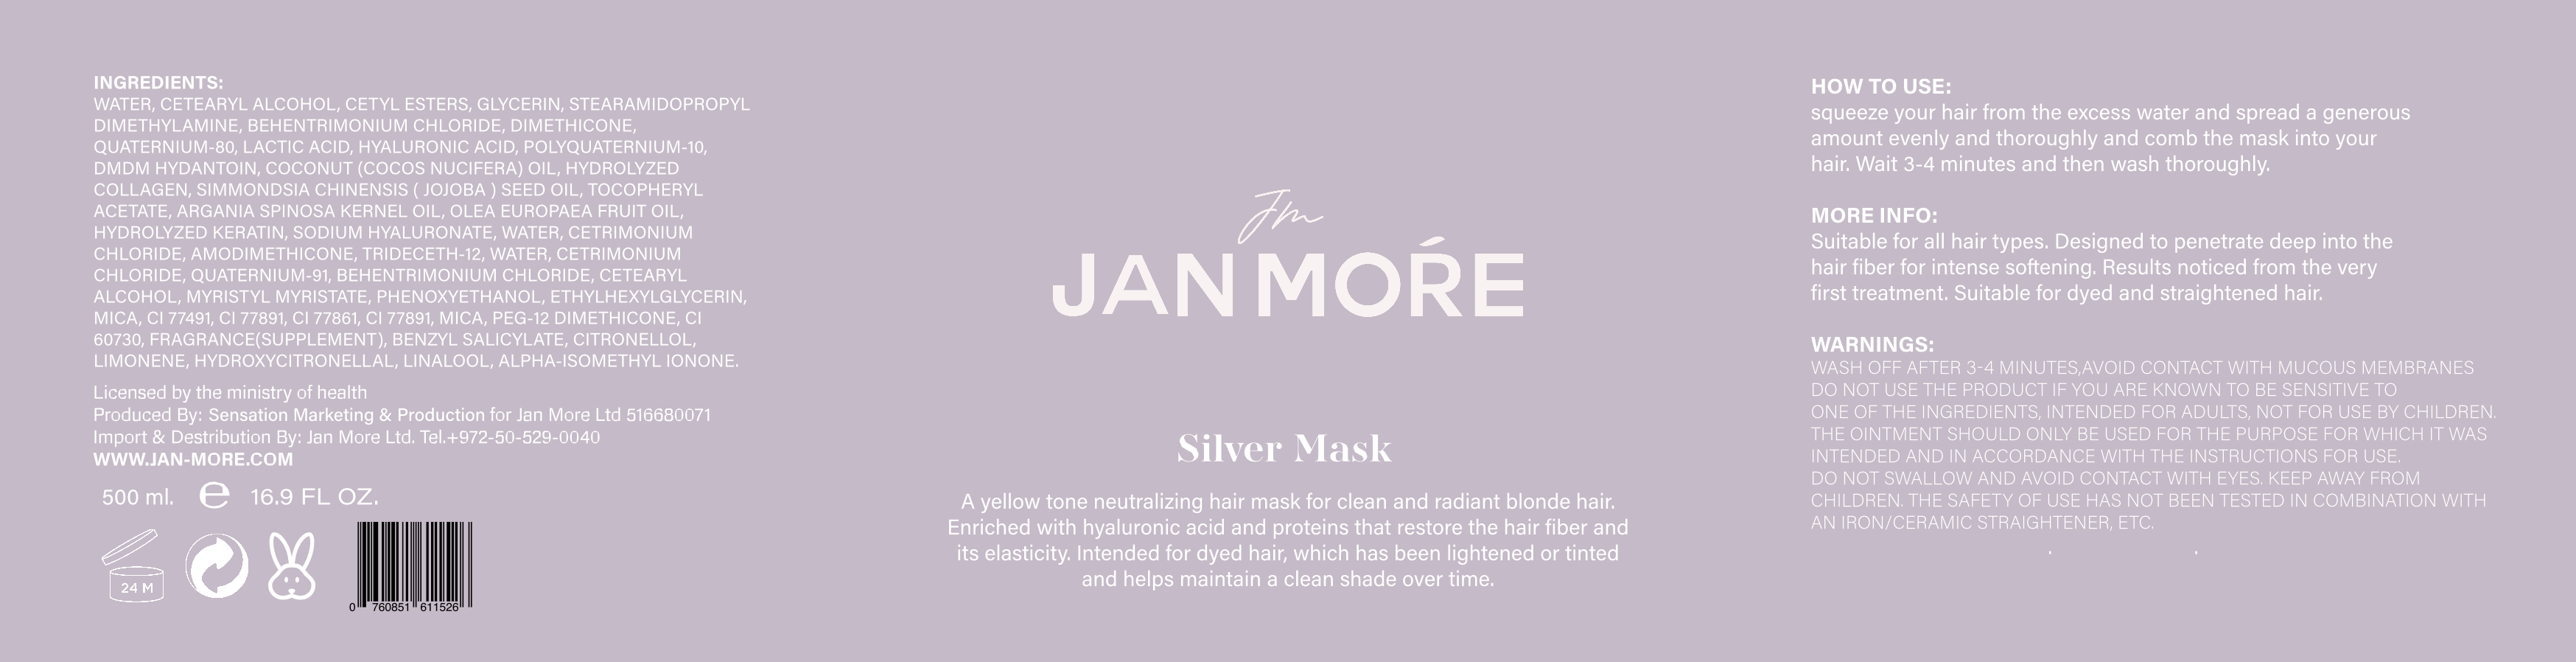 Product label - Silver mask